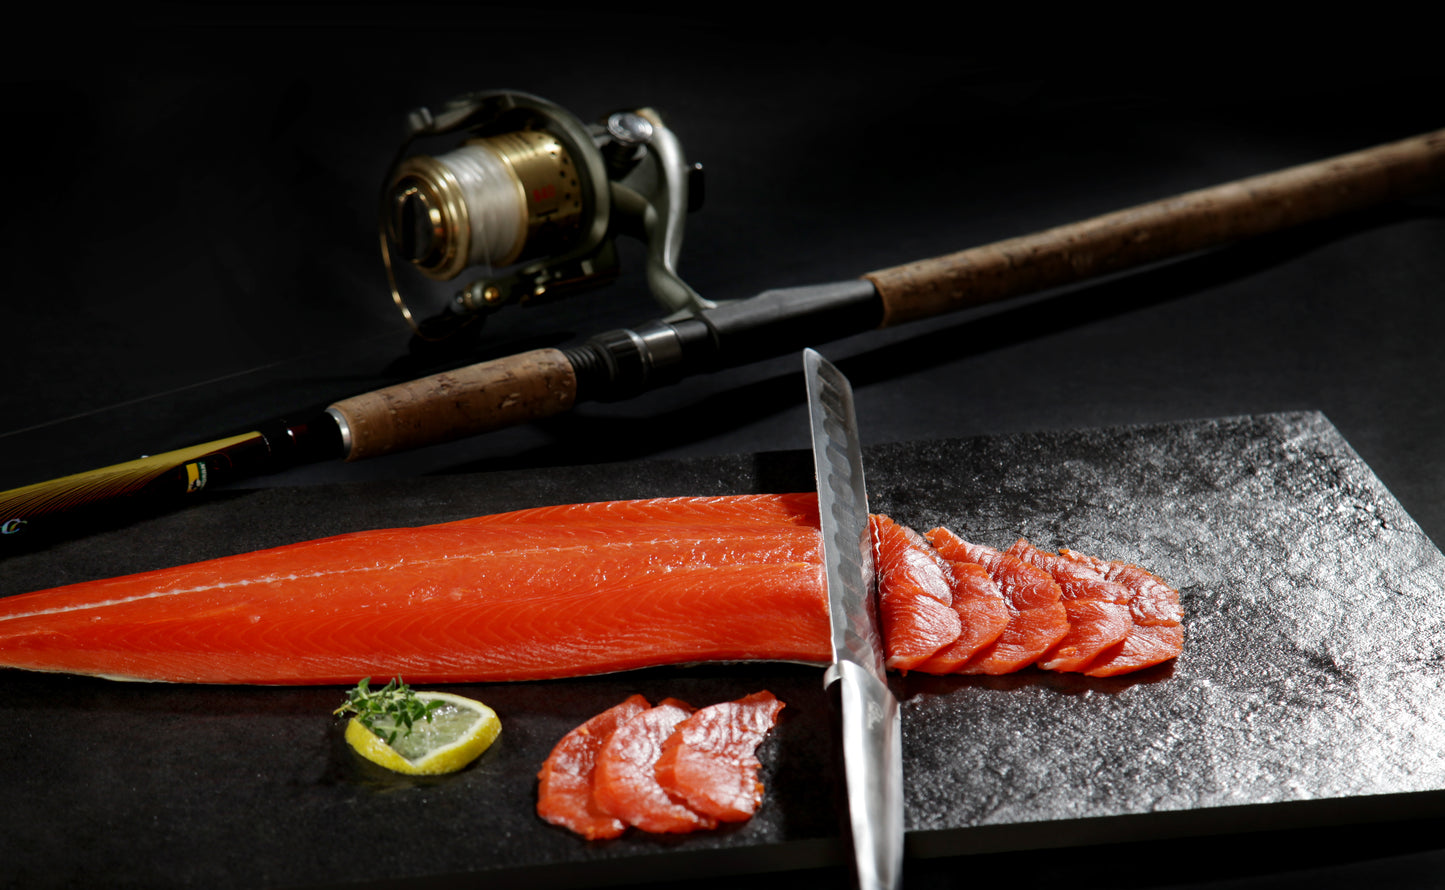 Youkon Wild Red Salmon - whole side unsliced 